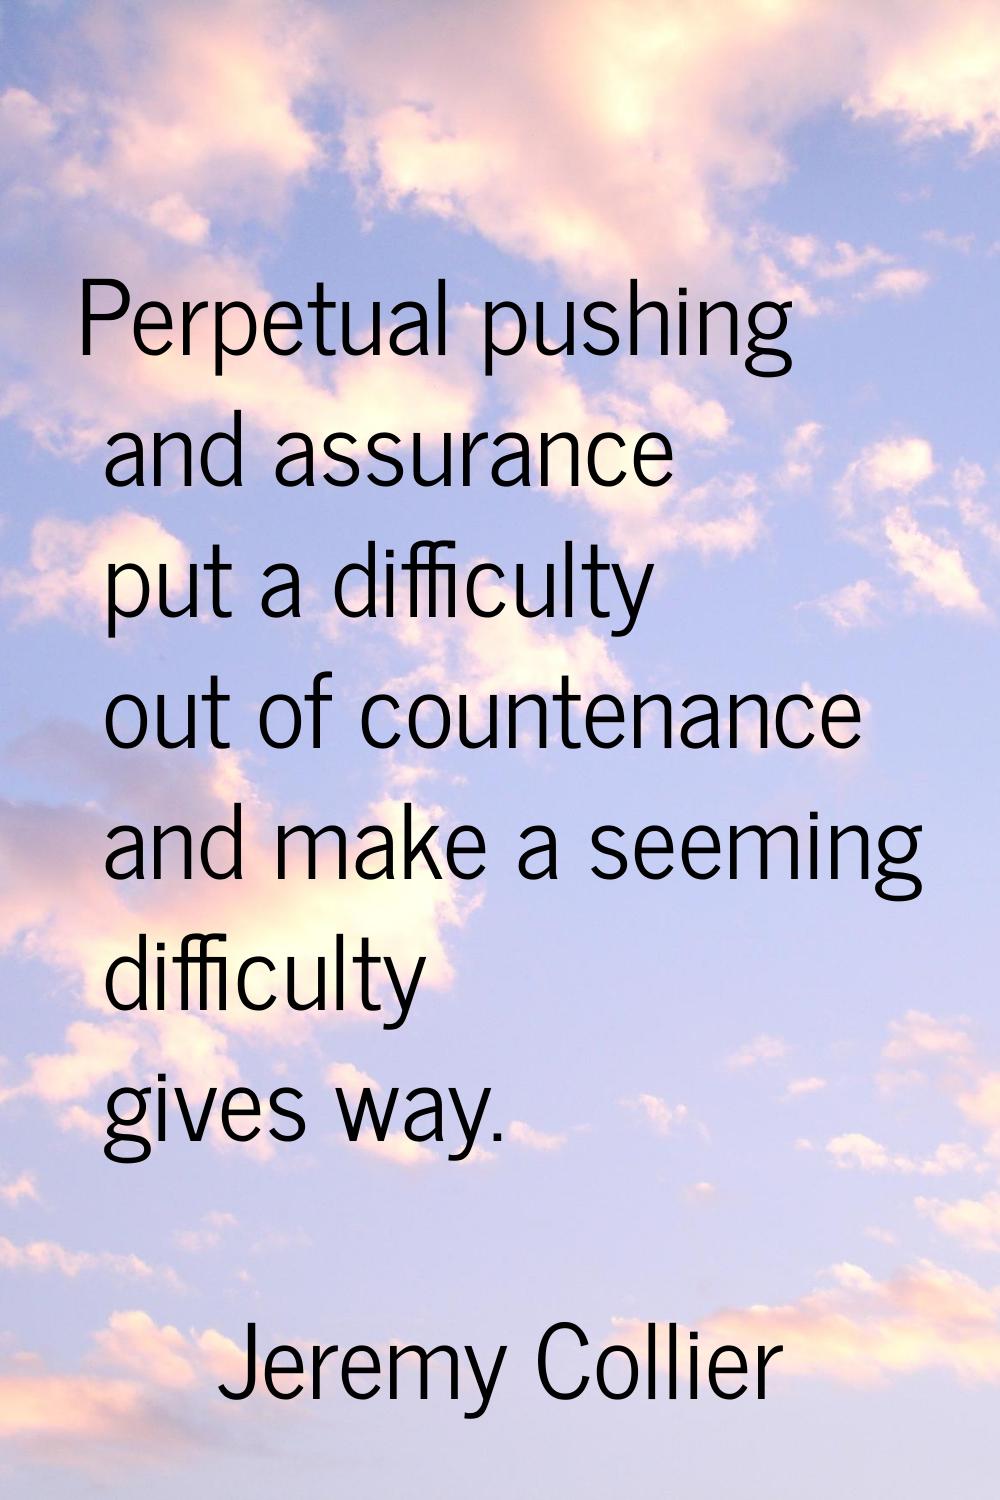 Perpetual pushing and assurance put a difficulty out of countenance and make a seeming difficulty g